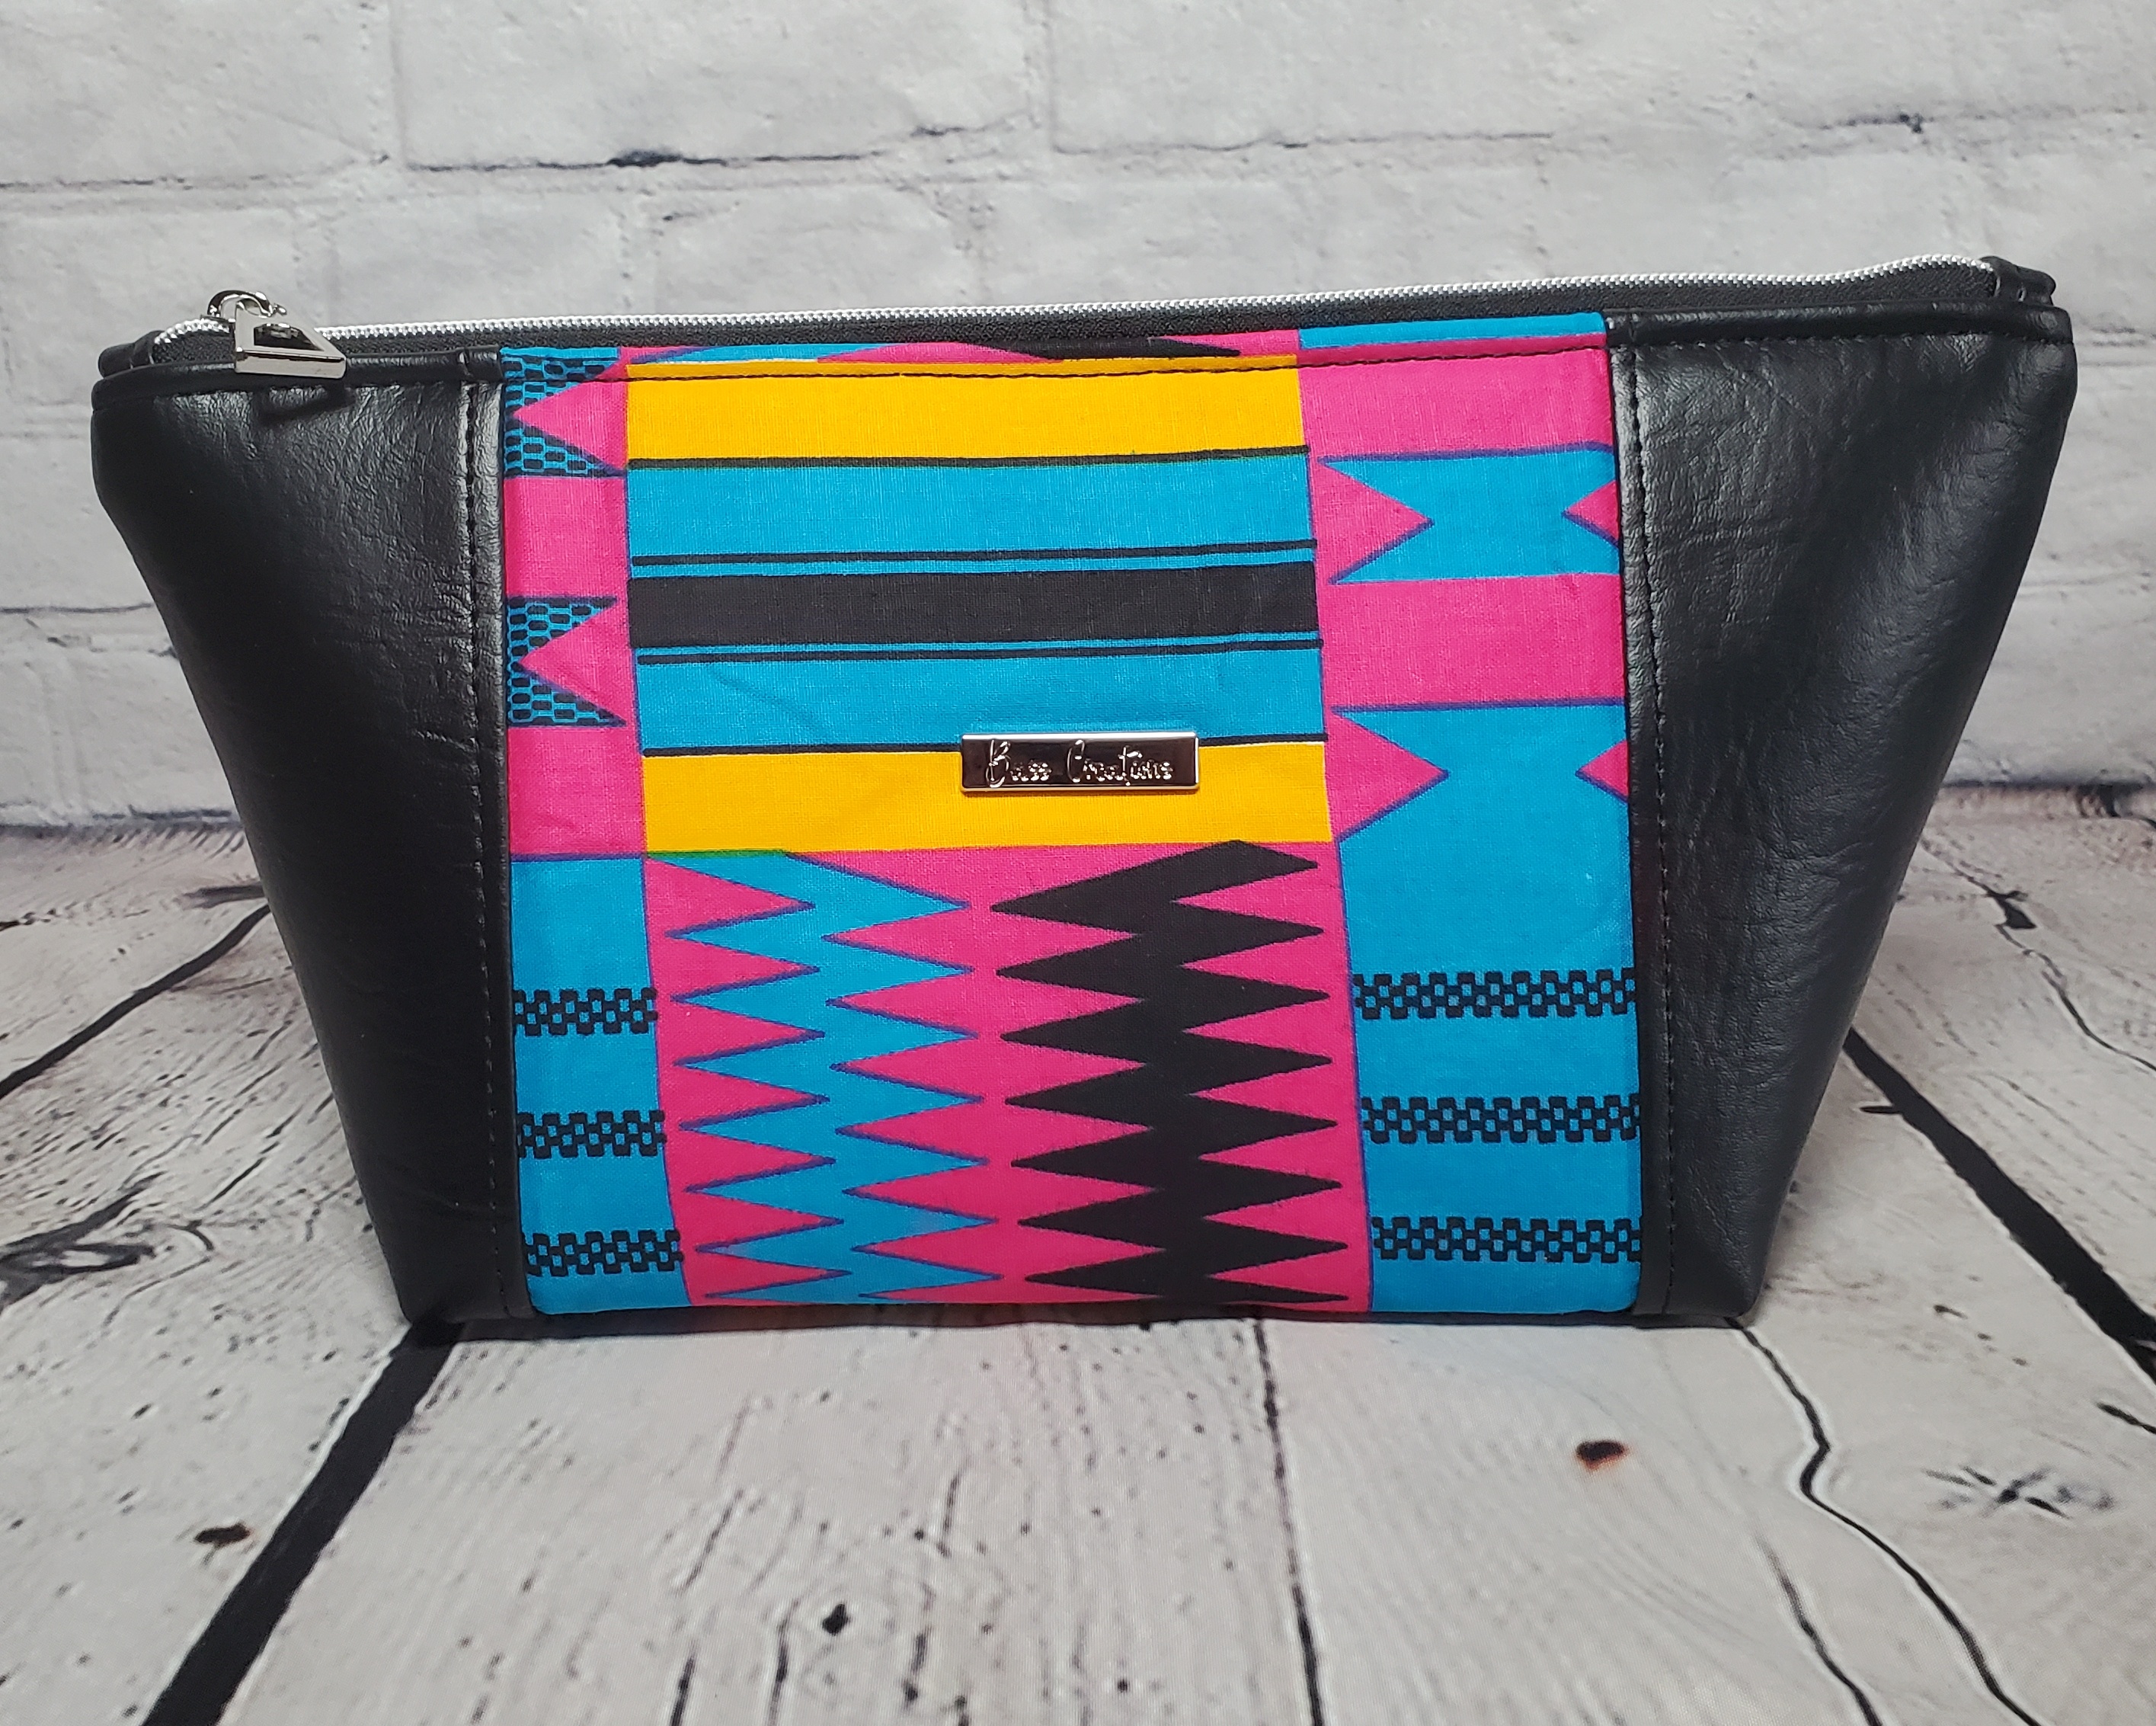 Pink blue and orange geometric print makeup bag with black faux leather accents, silver top zipper and silver Bass Creations logo.